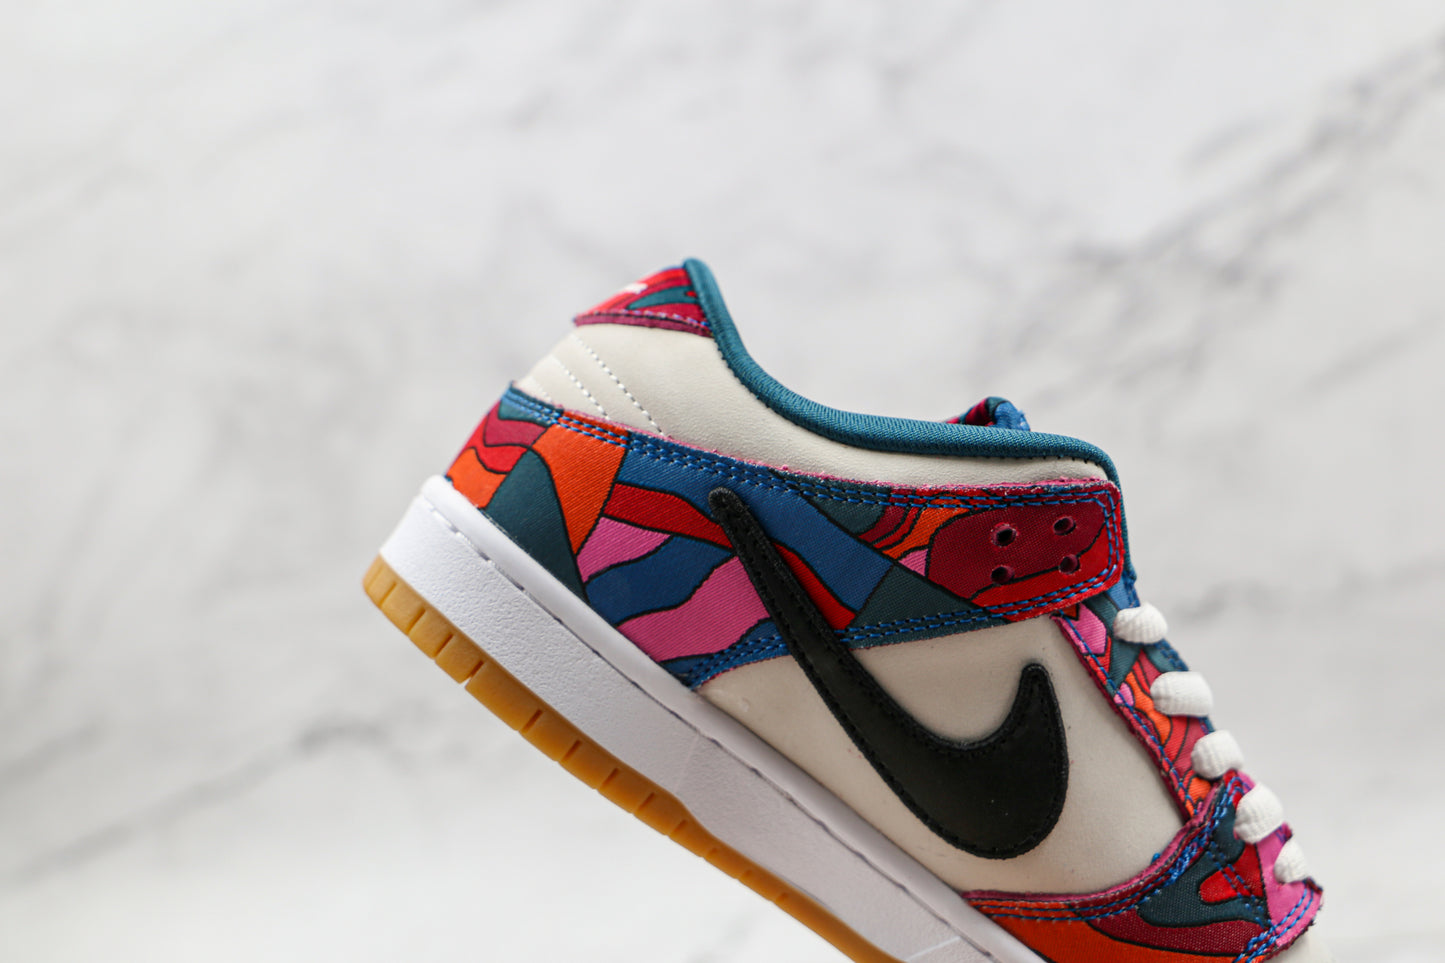 Nike SB Dunk Low Pro Parra Abstract Art